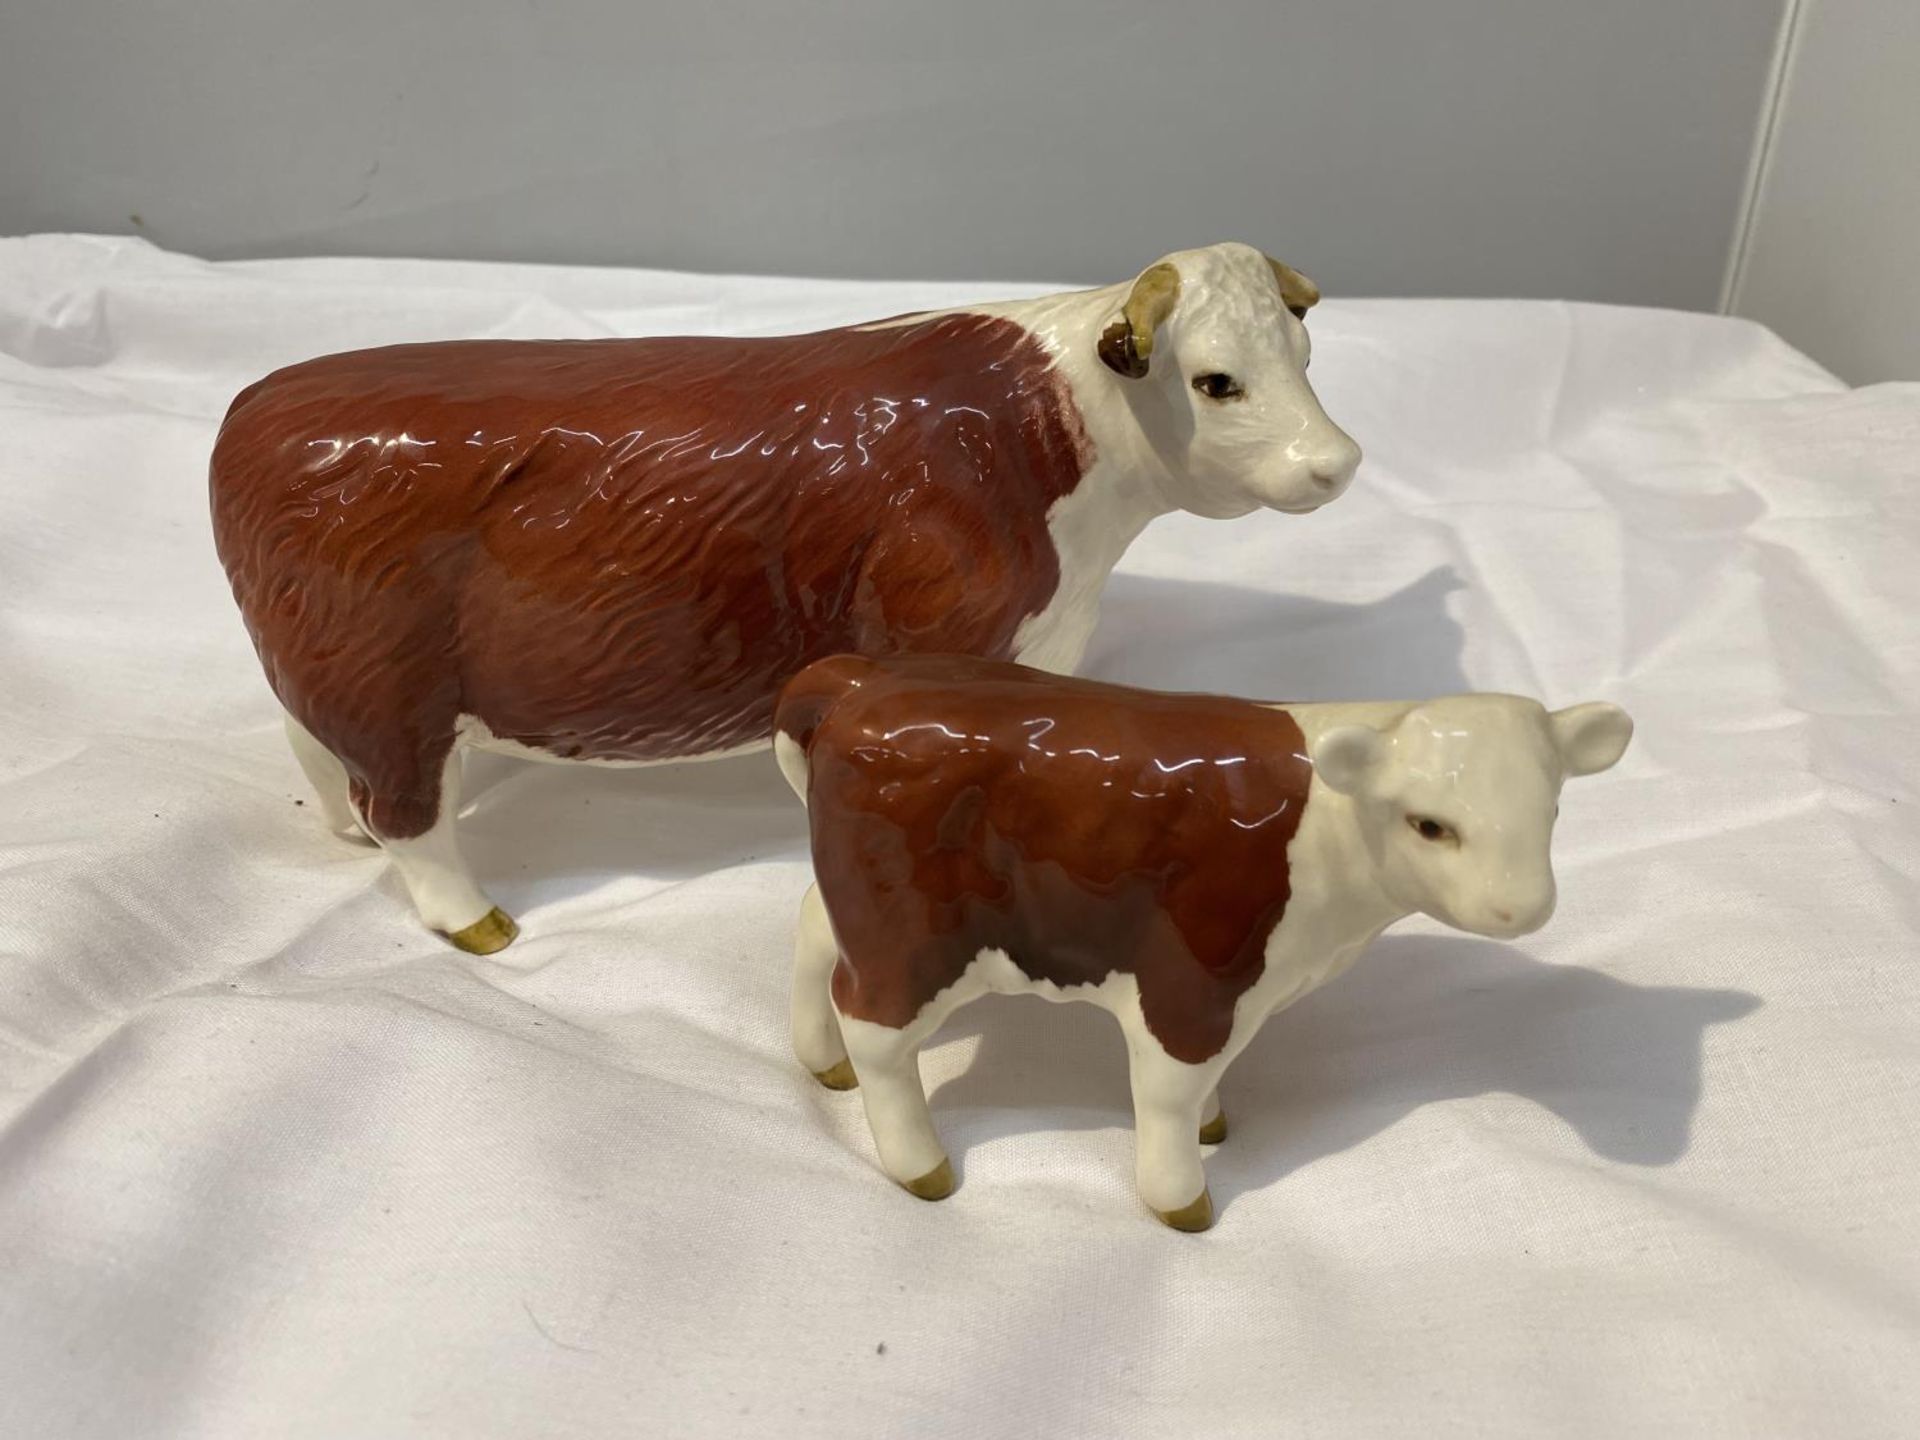 TWO BESWICK FIGURES, A HEREFORD COW AND A CALF